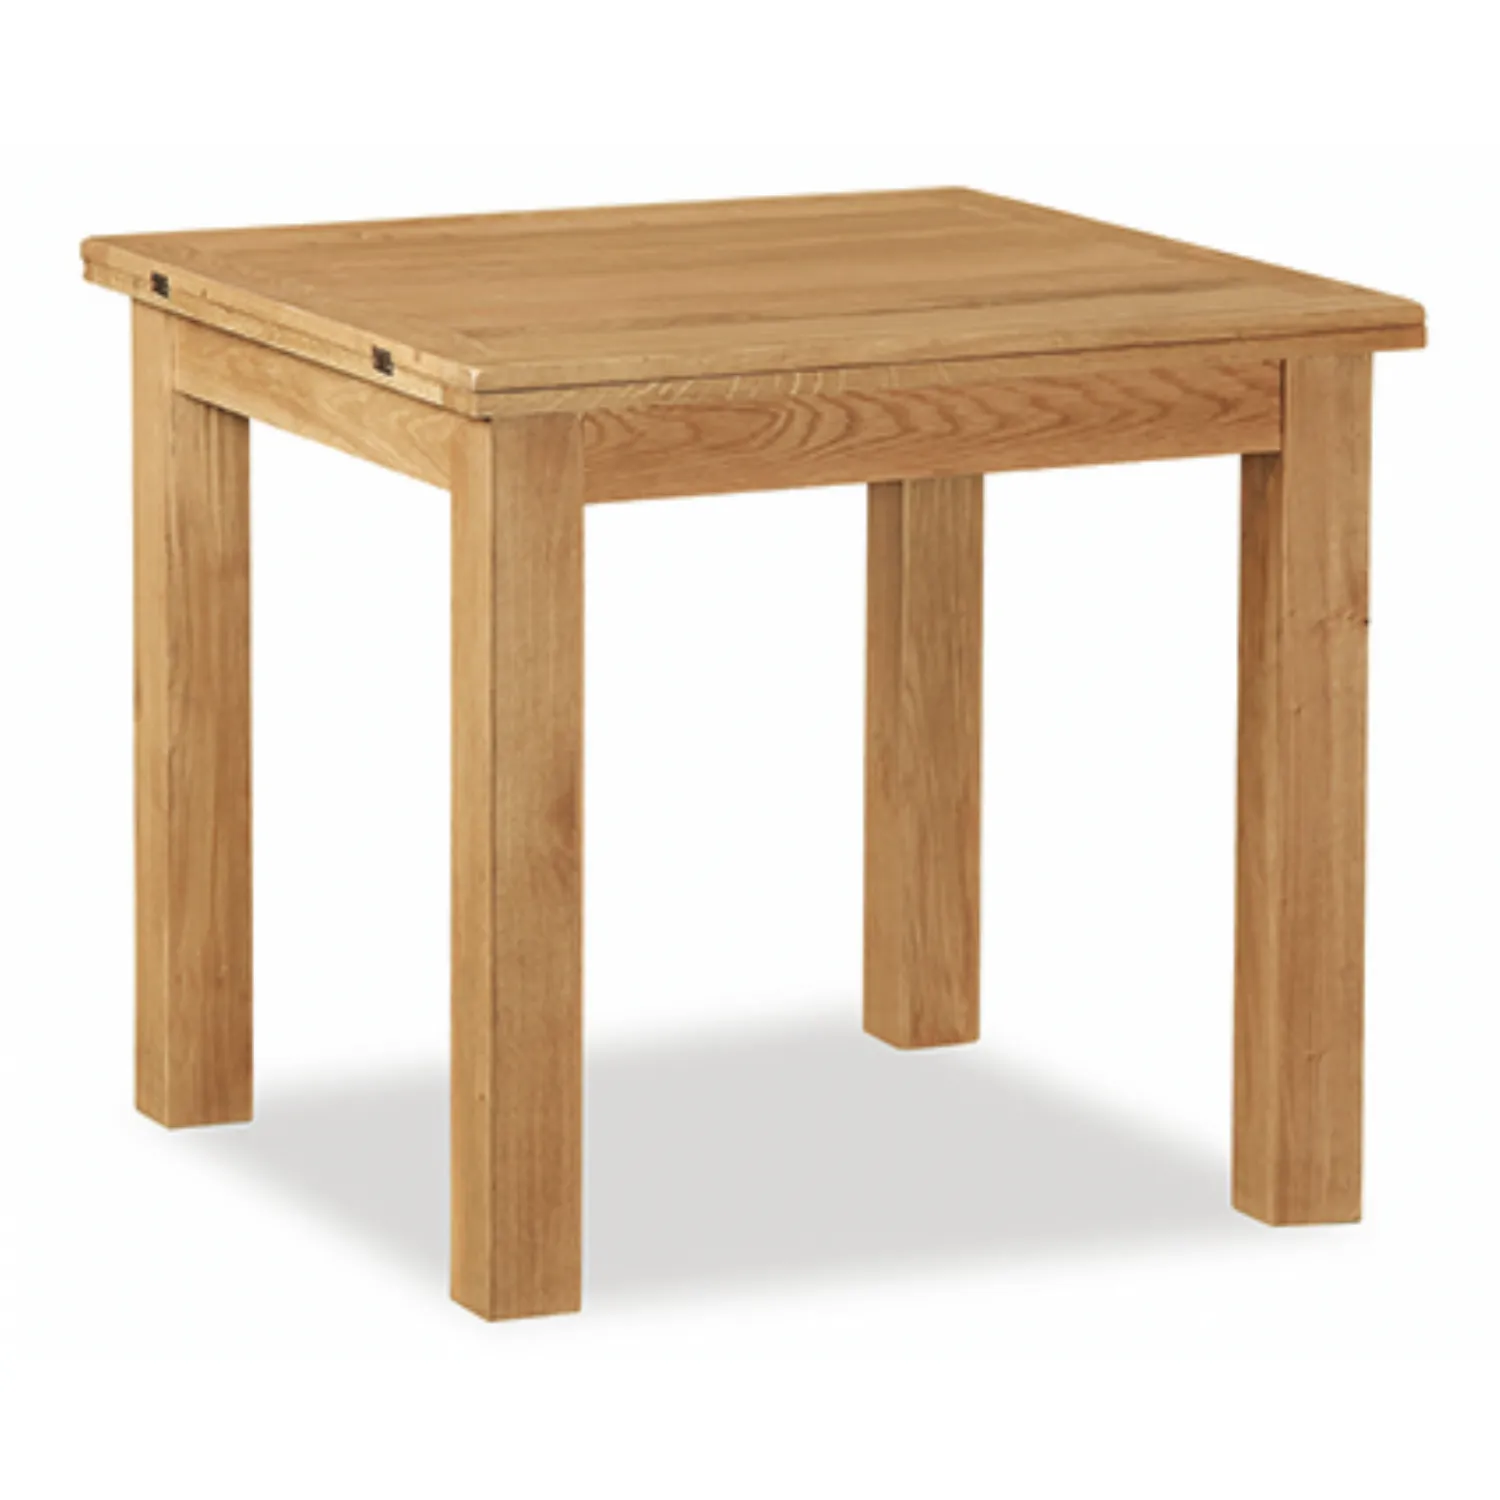 Light Oak 85cm Square Extending Table and 4 Chairs